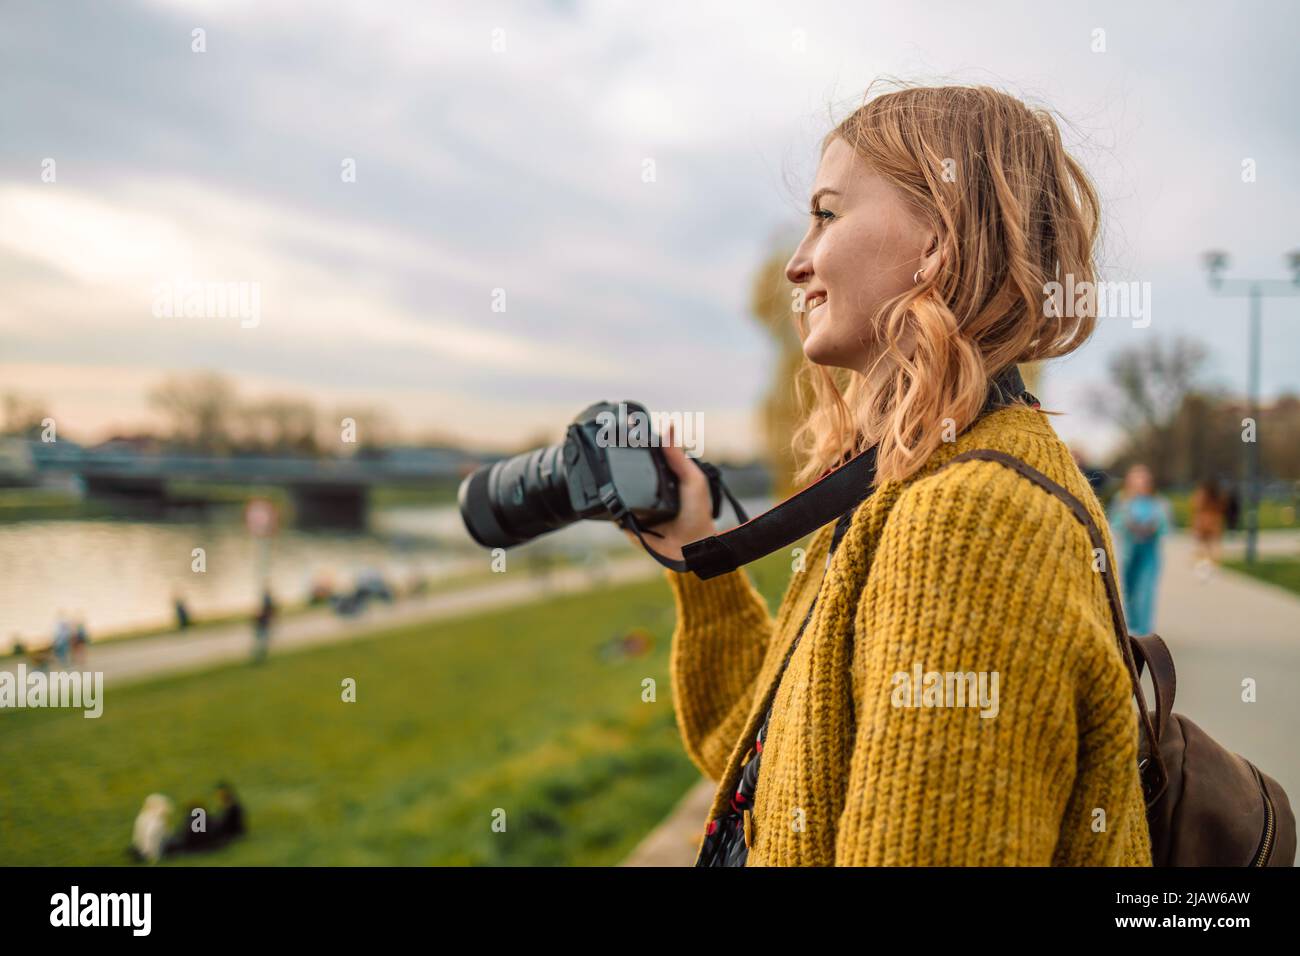 Photographer traveler 30s woman in style casual clothes take photo on video camera outdoor at city view. Copy space mockup. Hobie adventure concept Stock Photo